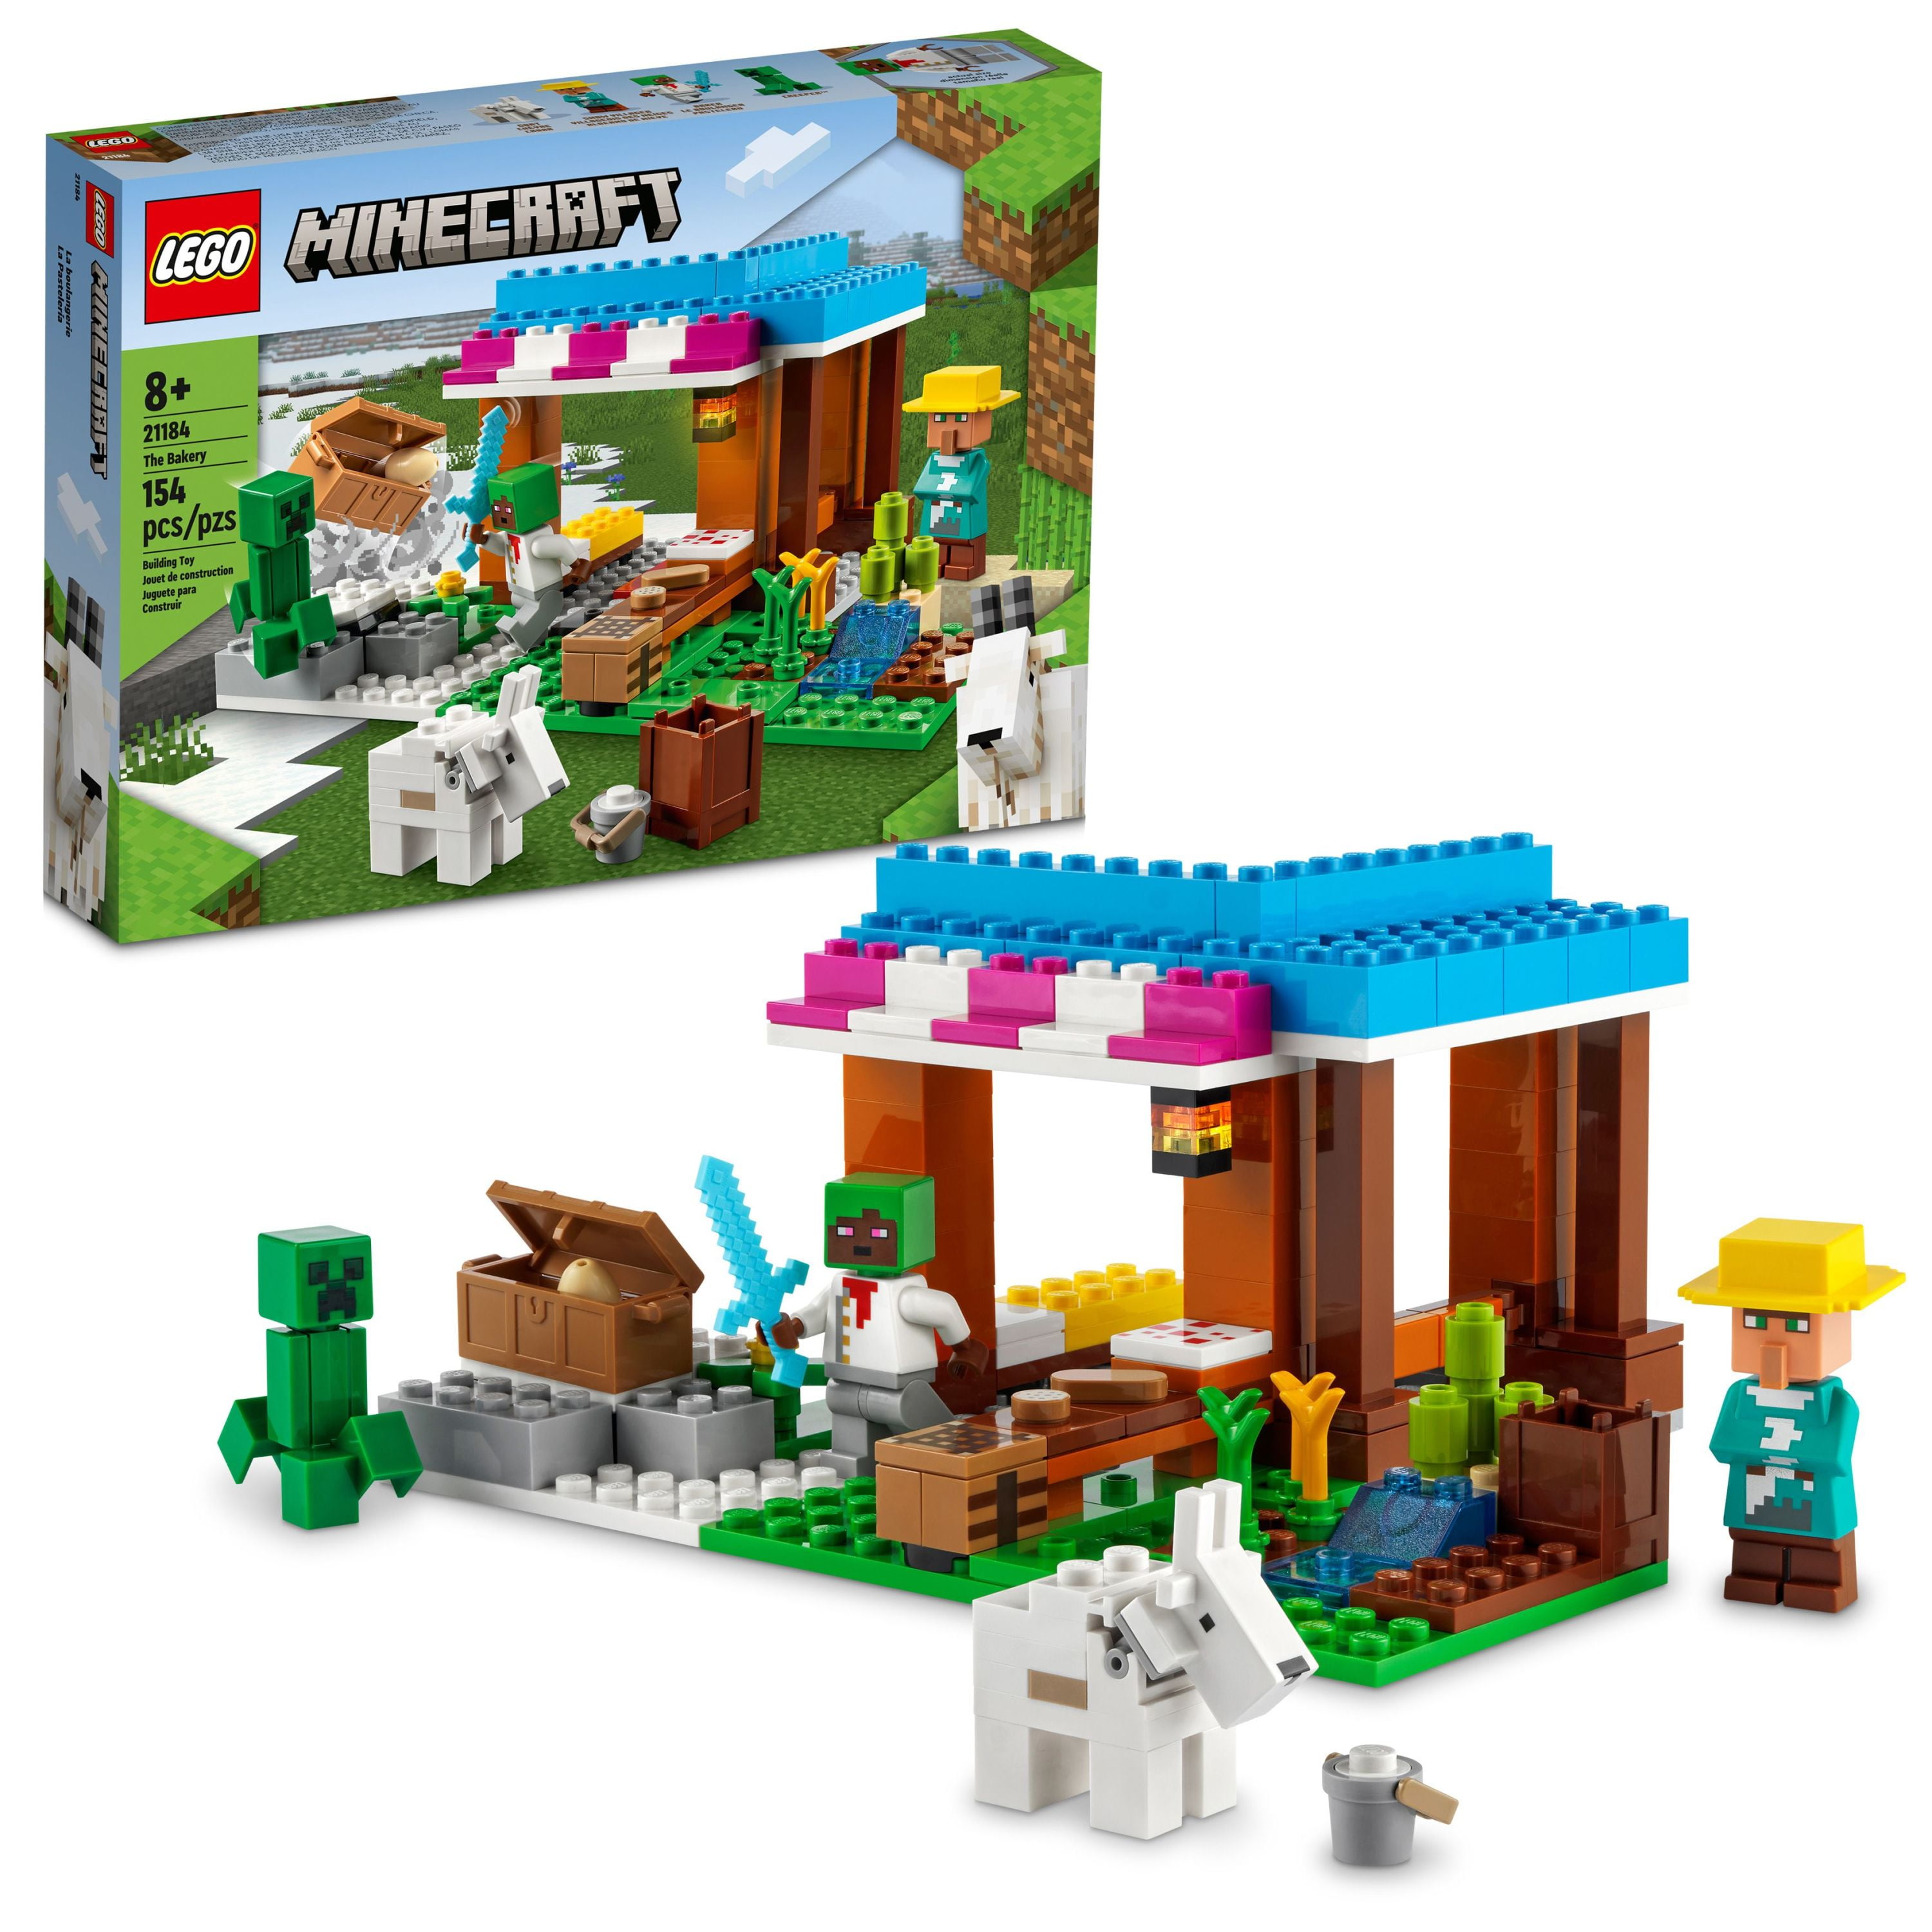 LEGO Minecraft The Bakery 21184 - Building Toy Set for Kids, Featuring 3  Figures and a Goat, Game Inspired Play with Village and Treasure Chest